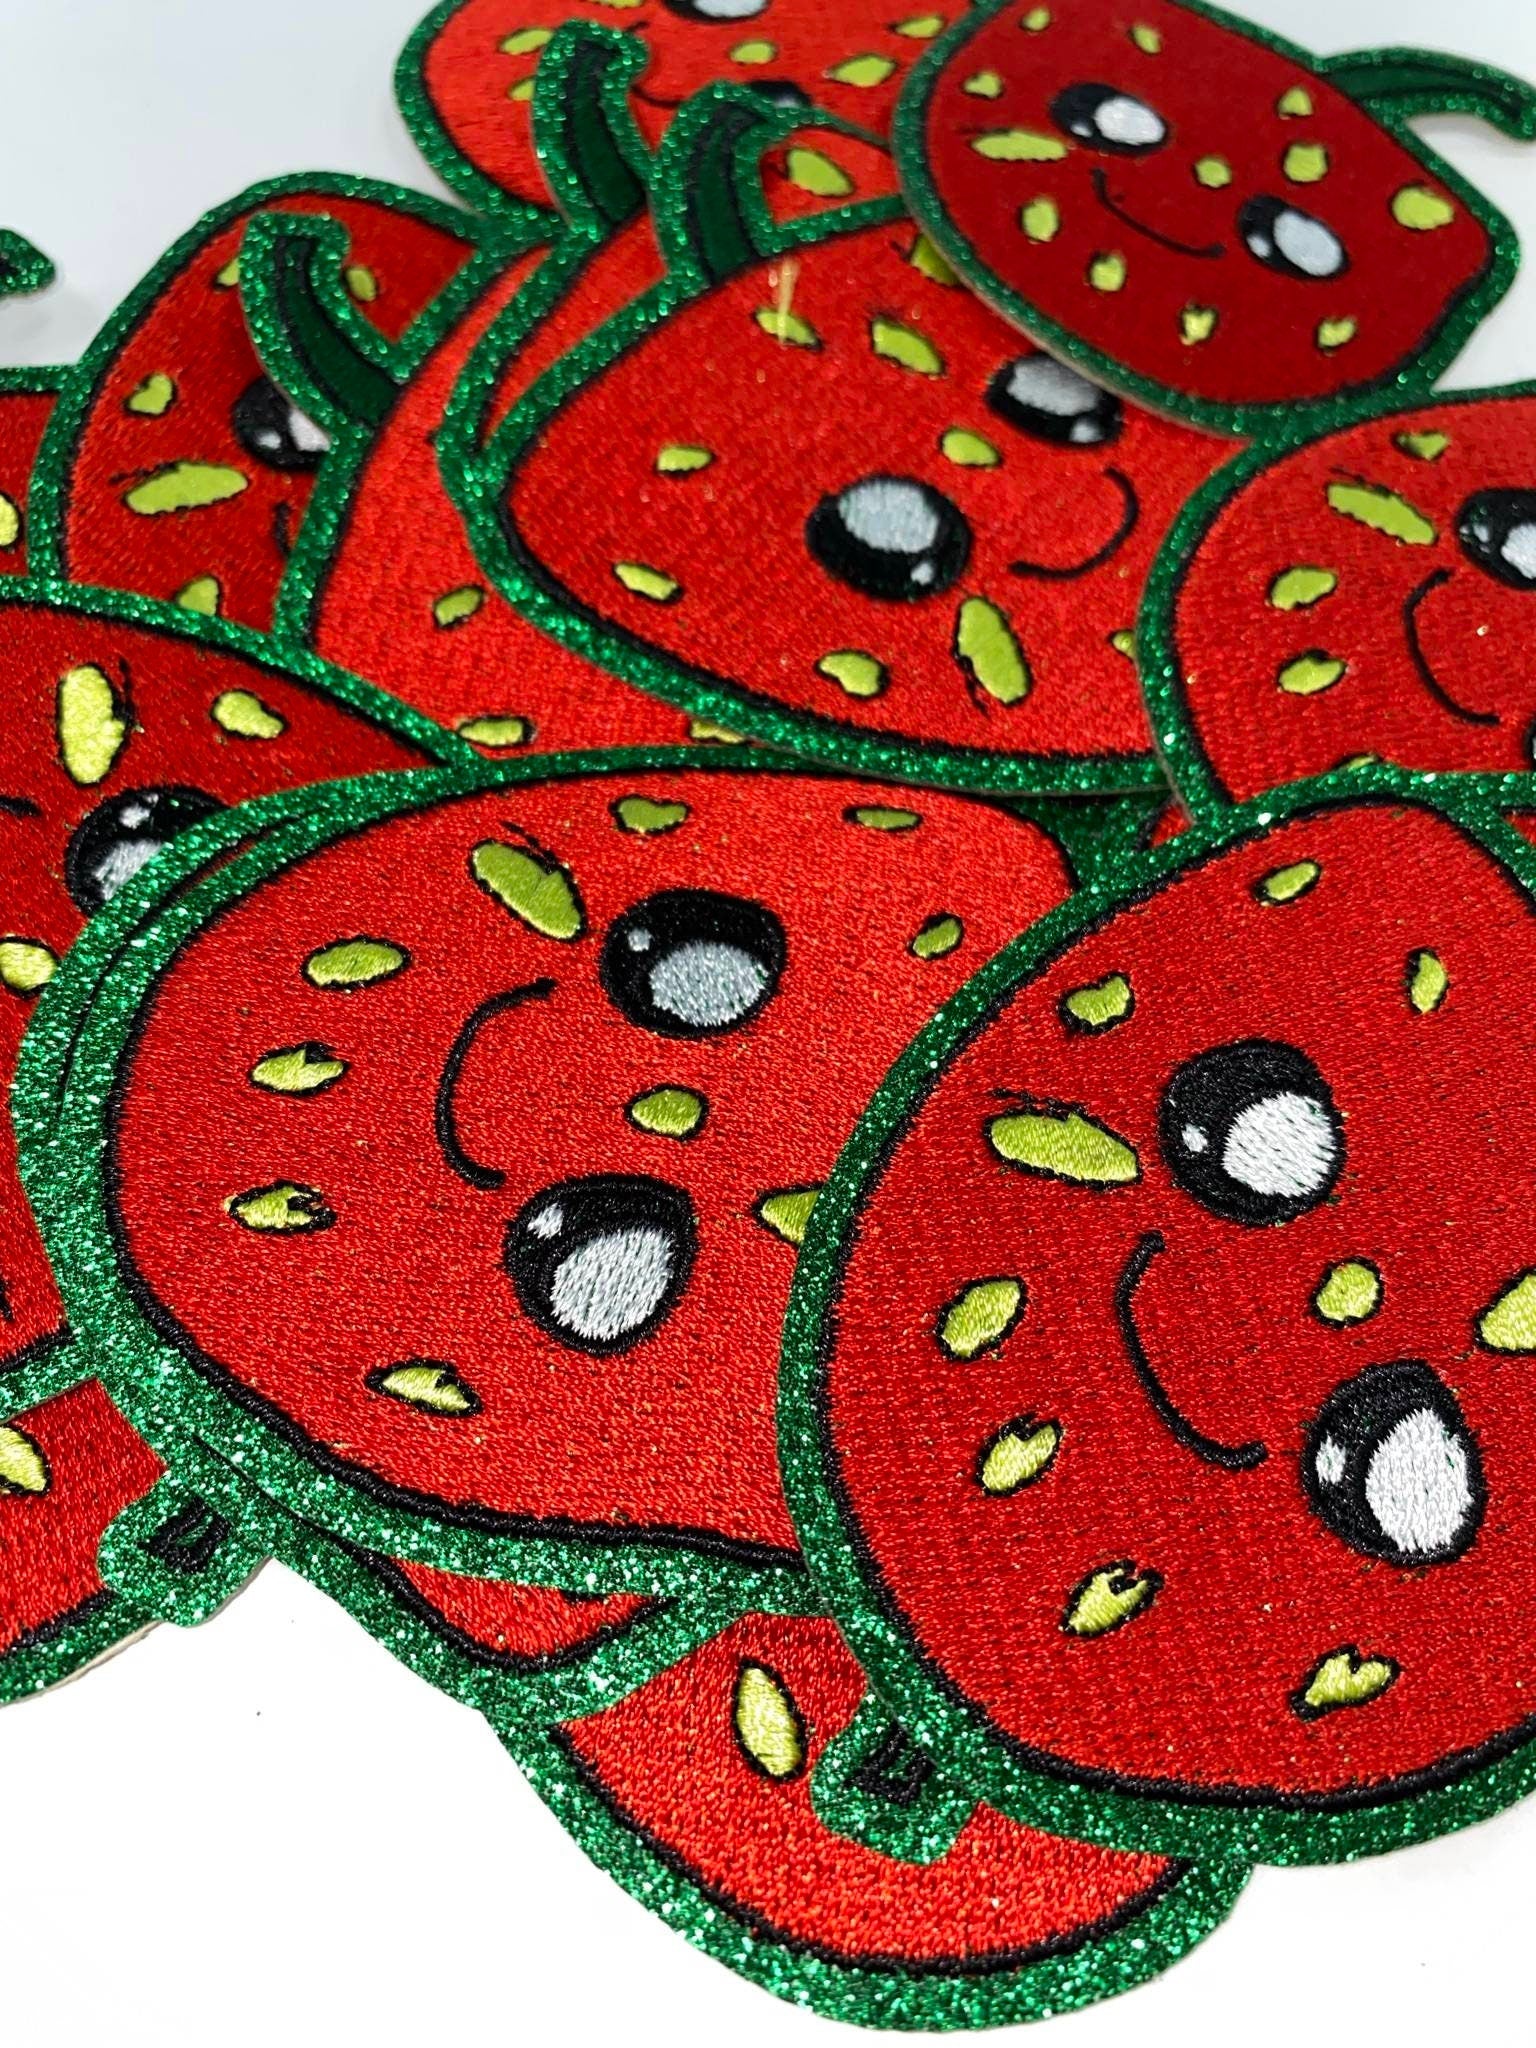 NEW, Adorable 1-pc "Strawberry" Patch w/Green GLITTER, Cute Patch for Girls, iron-on Patch for Denim & Crocs Patch for Little Girls, Size 3"